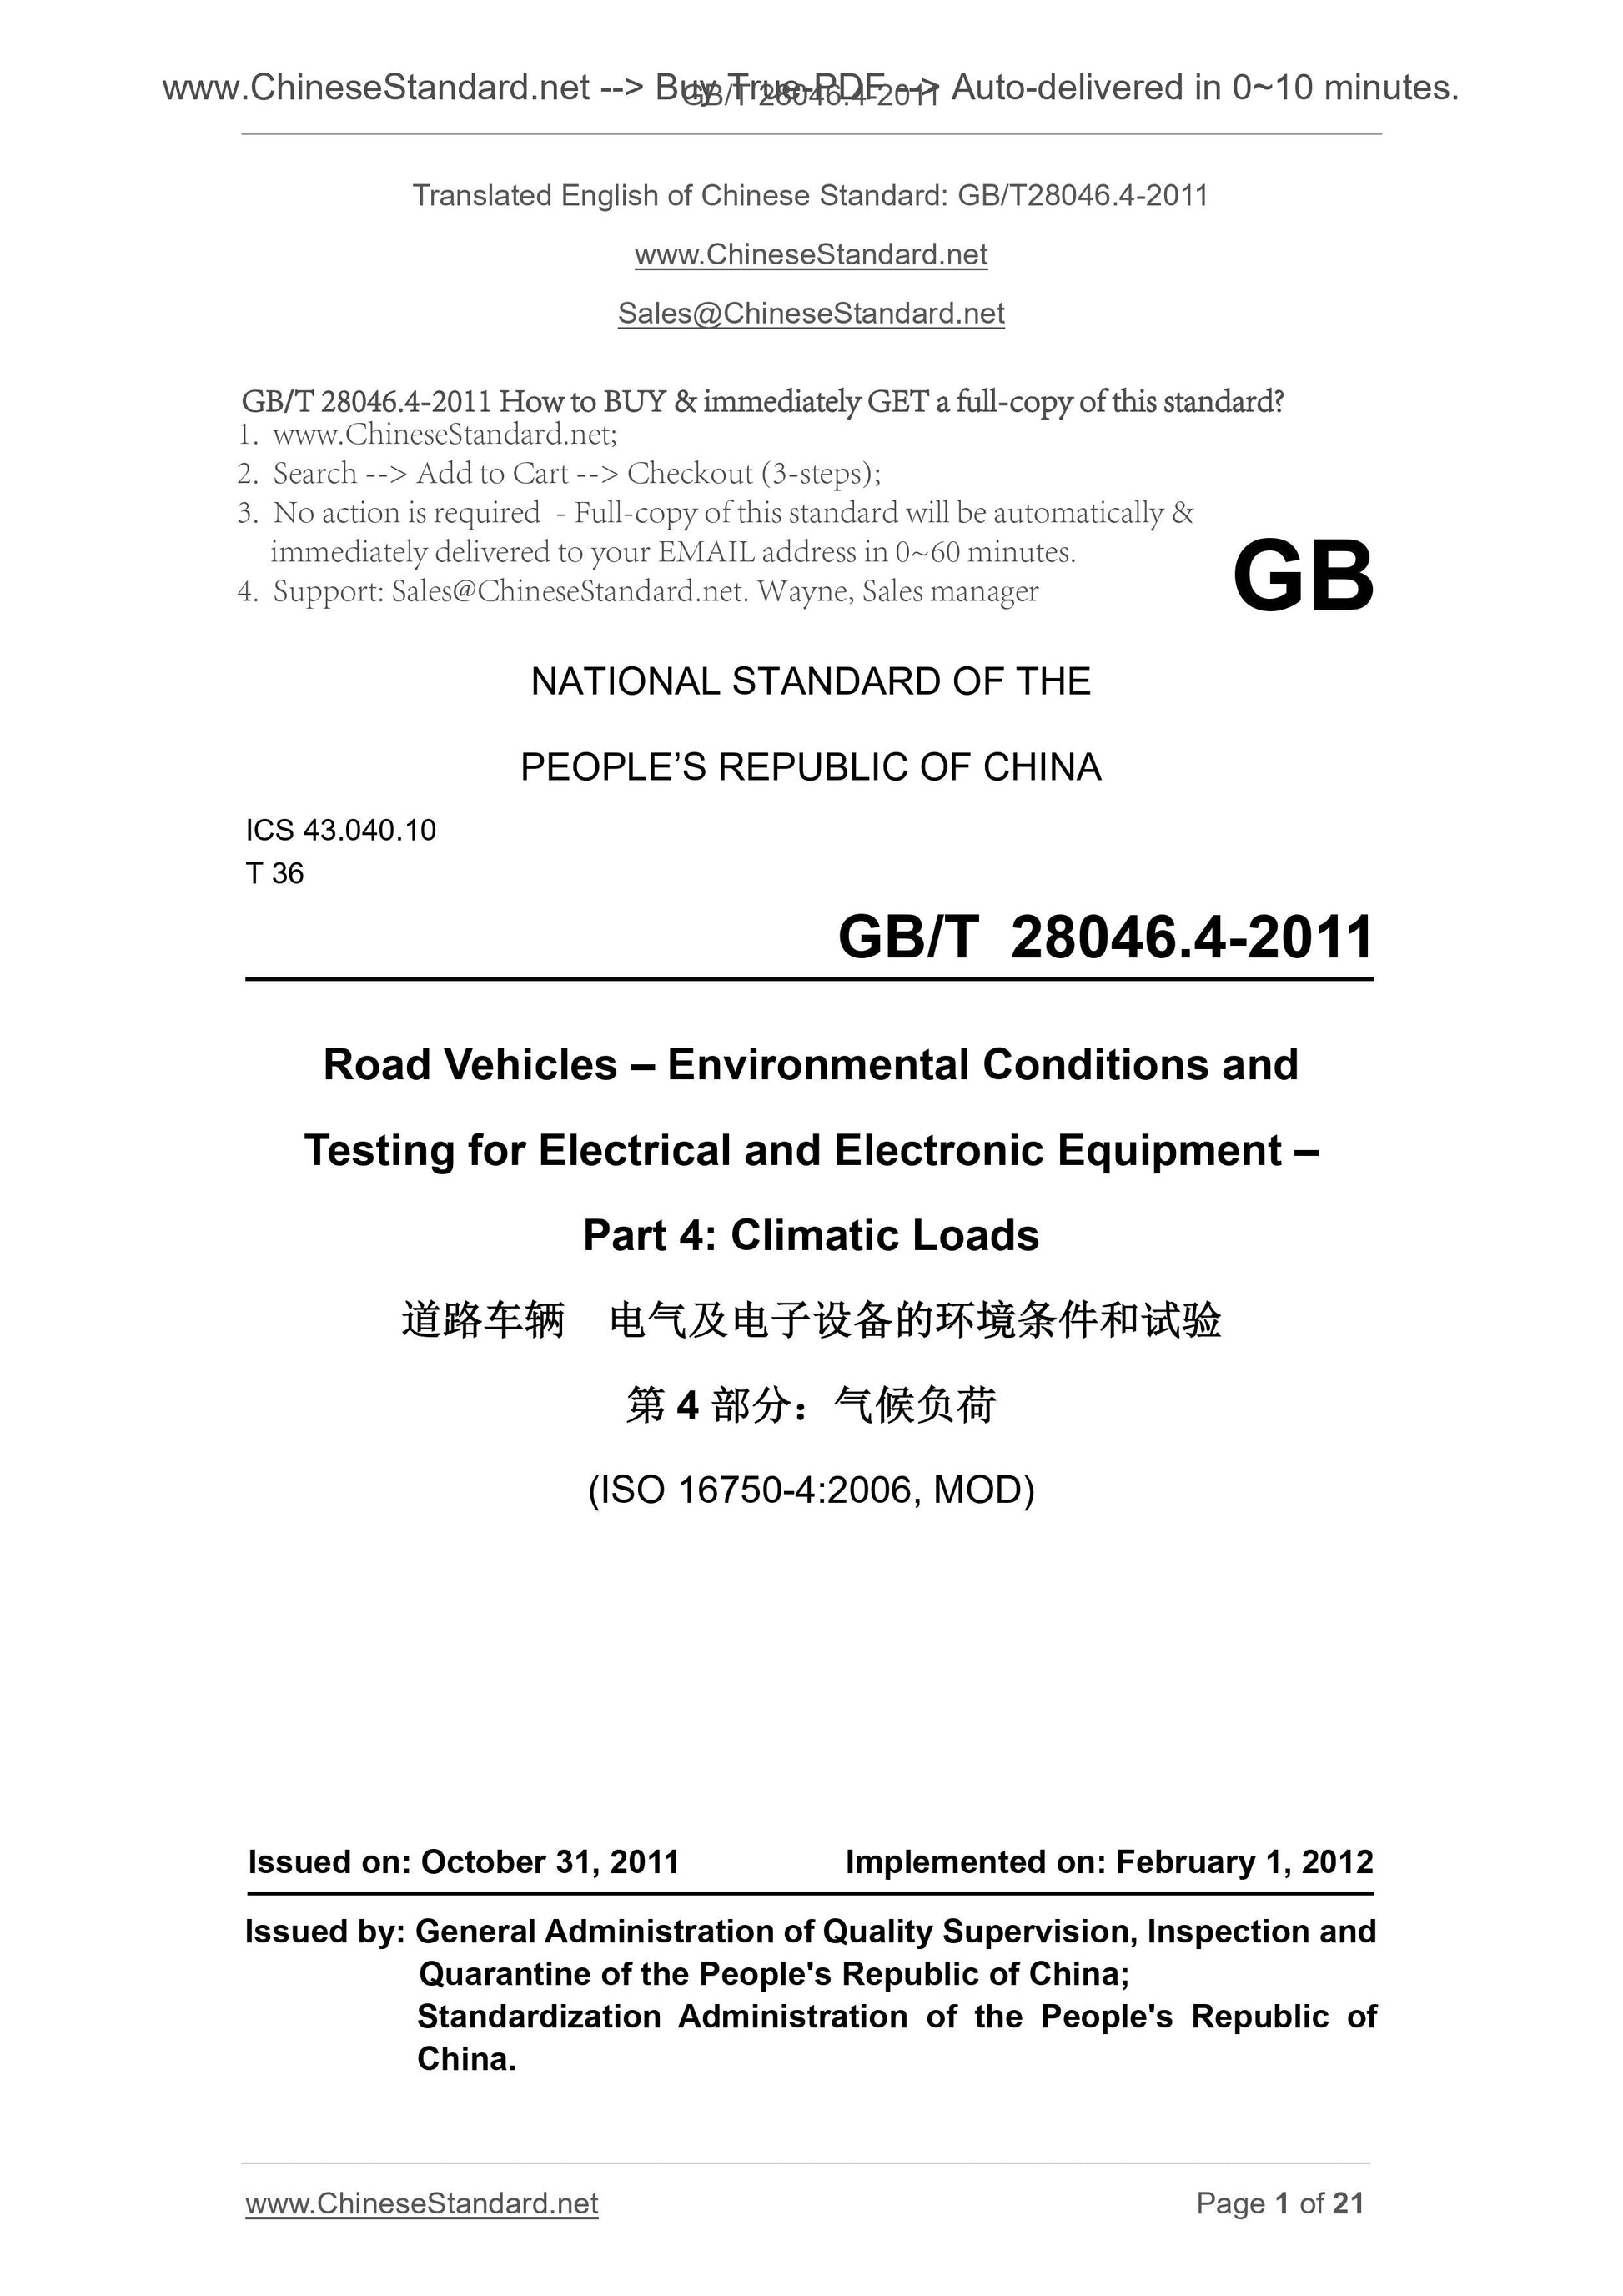 GB/T 28046.4-2011 Page 1